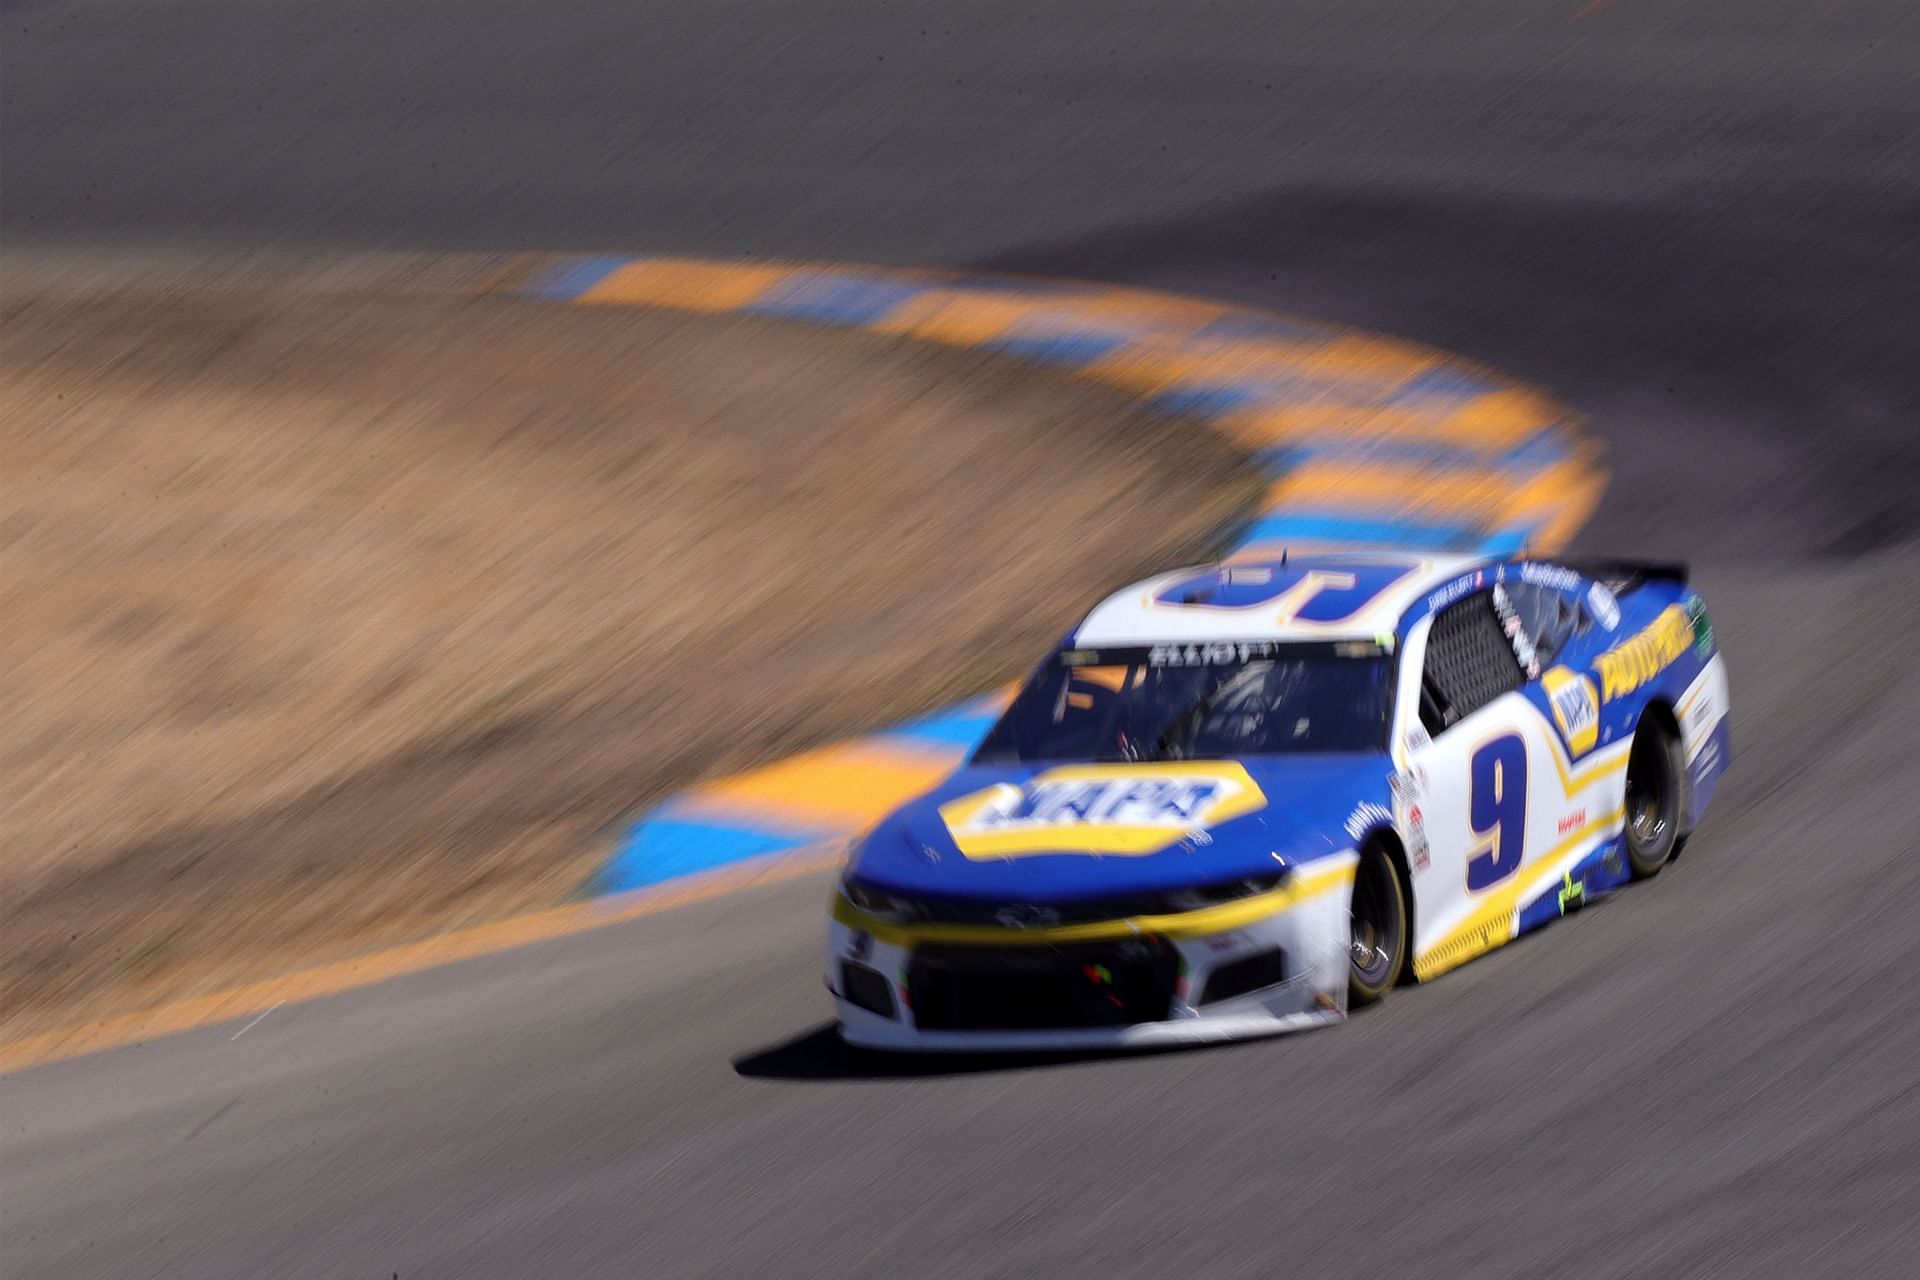 NASCAR Cup Series Toyota/Save Mart 350 at Sonoma Raceway